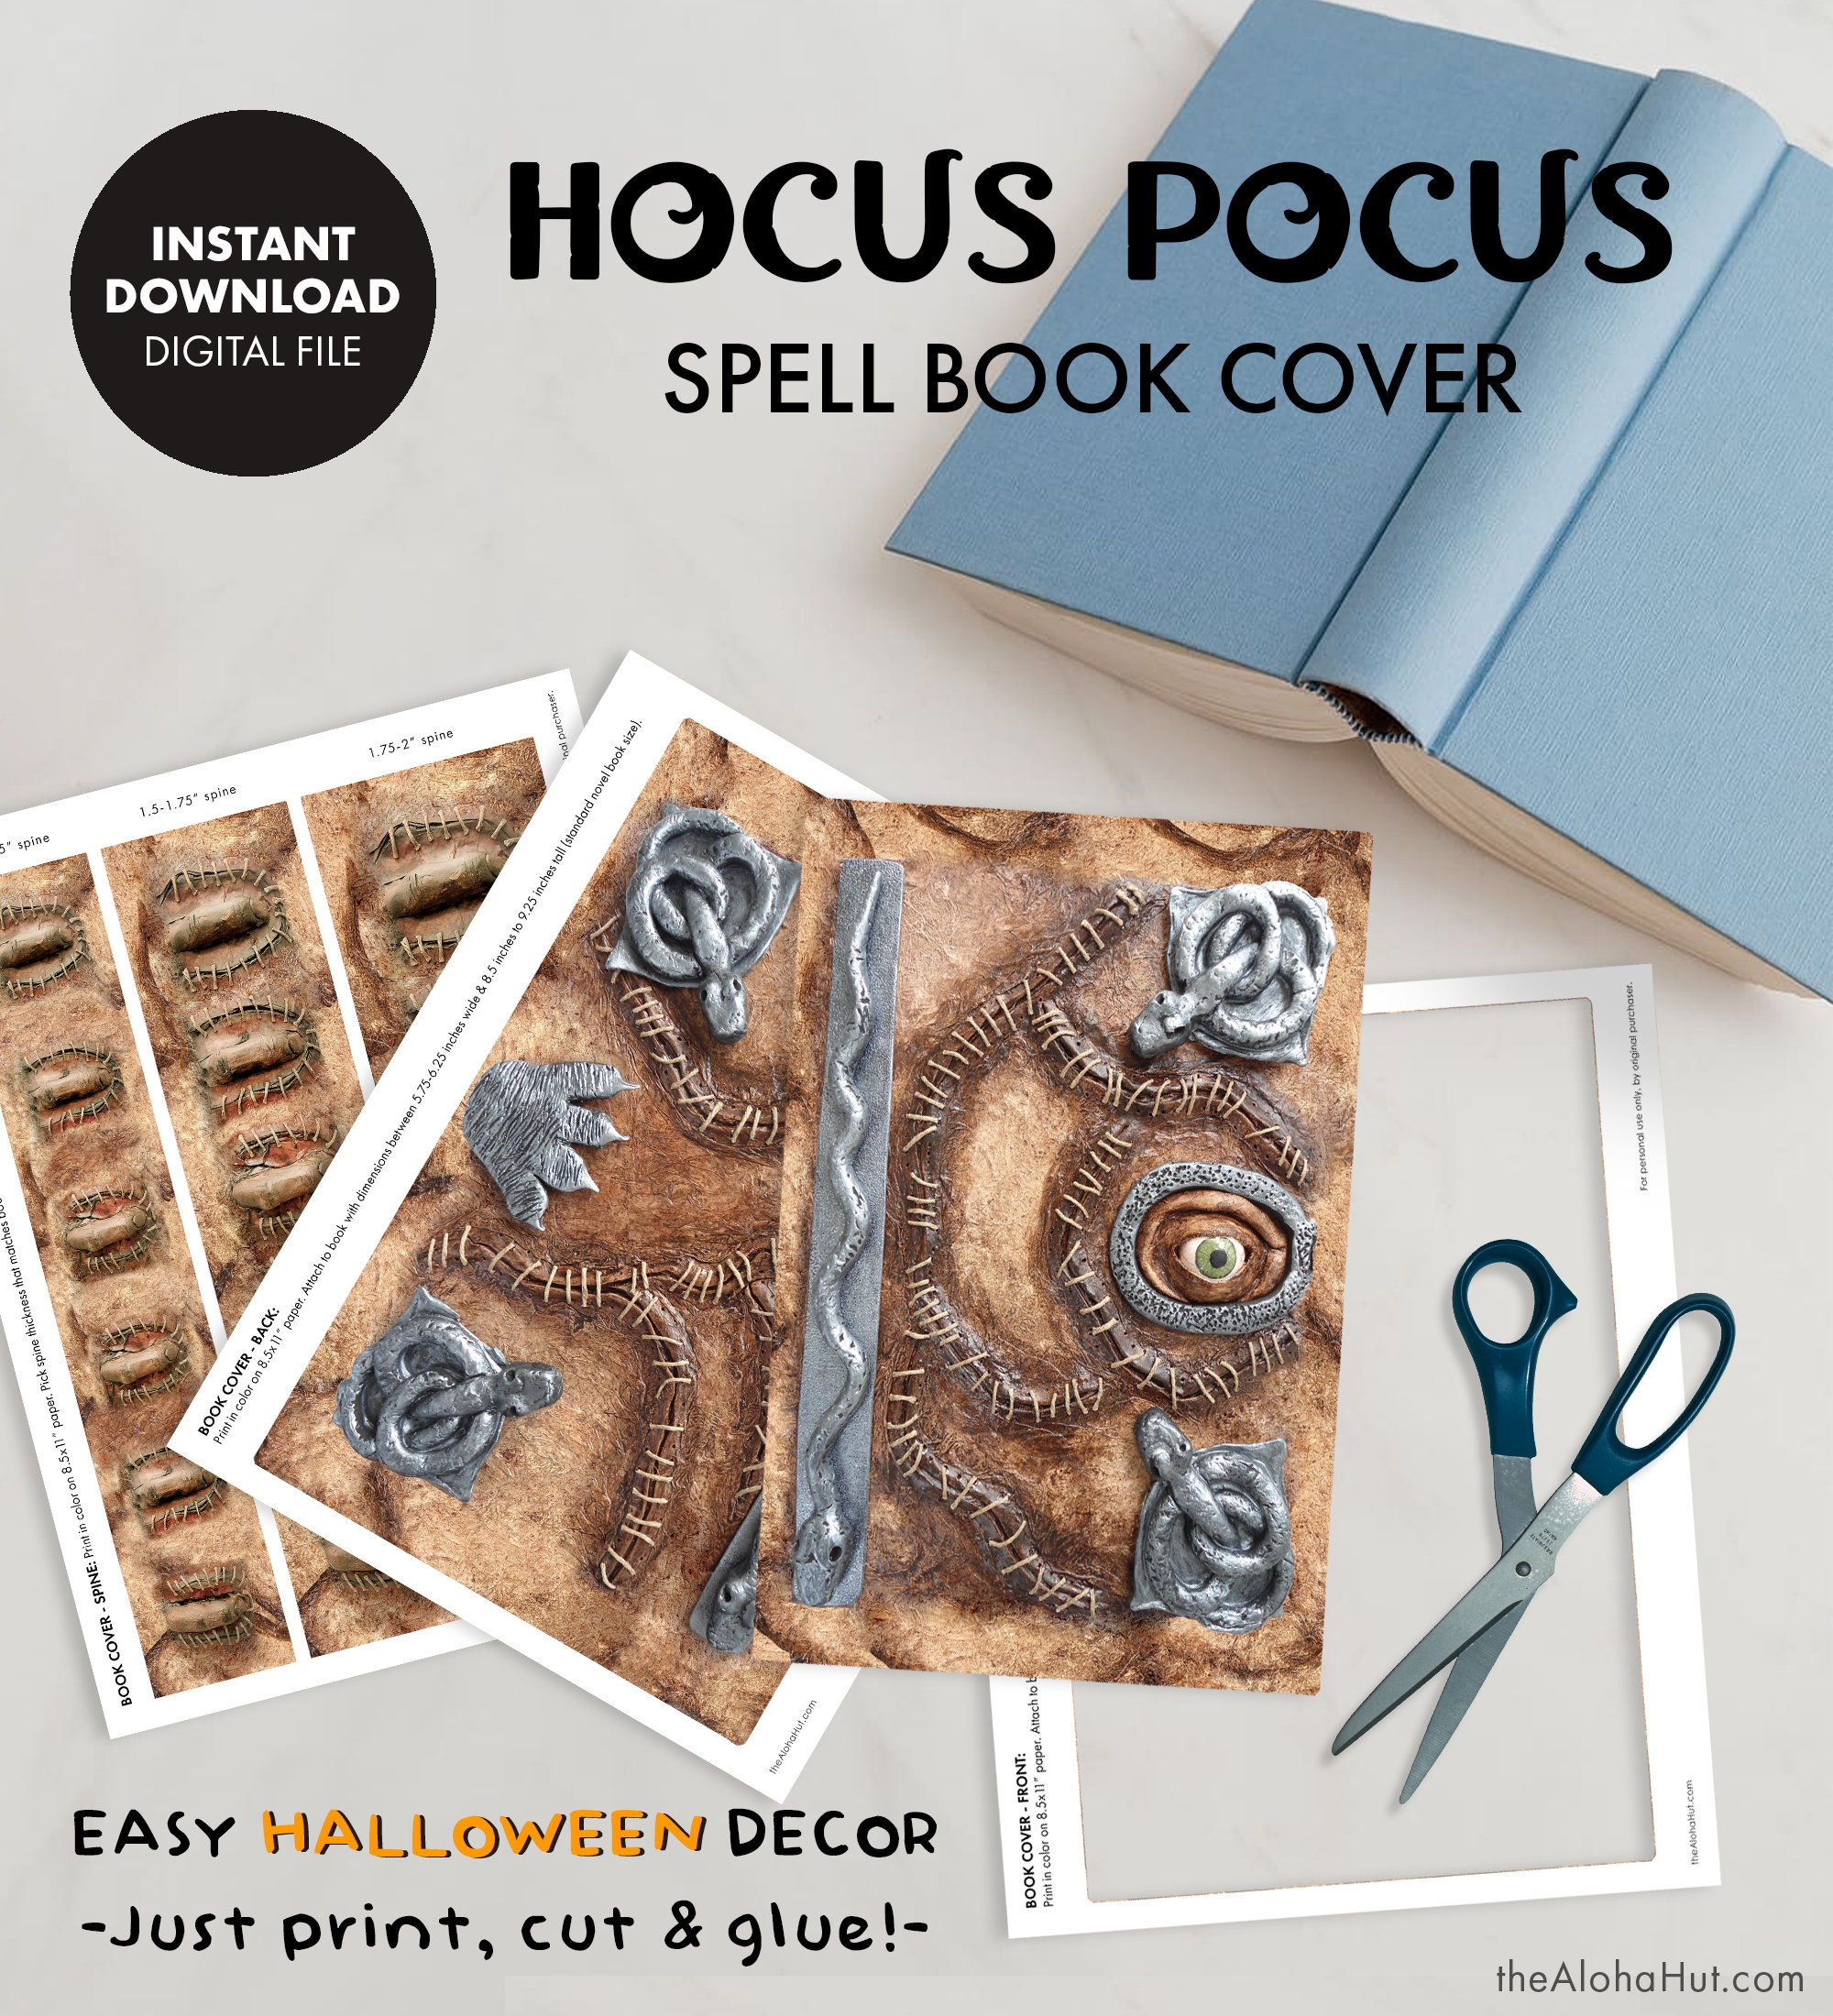 Printable HOCUS POCUS Spell Book Cover Halloween Decorations Decor Instant Digital Download Sanderson Sisters Spellbook Witchcraft Witch Etsy Hong Kong